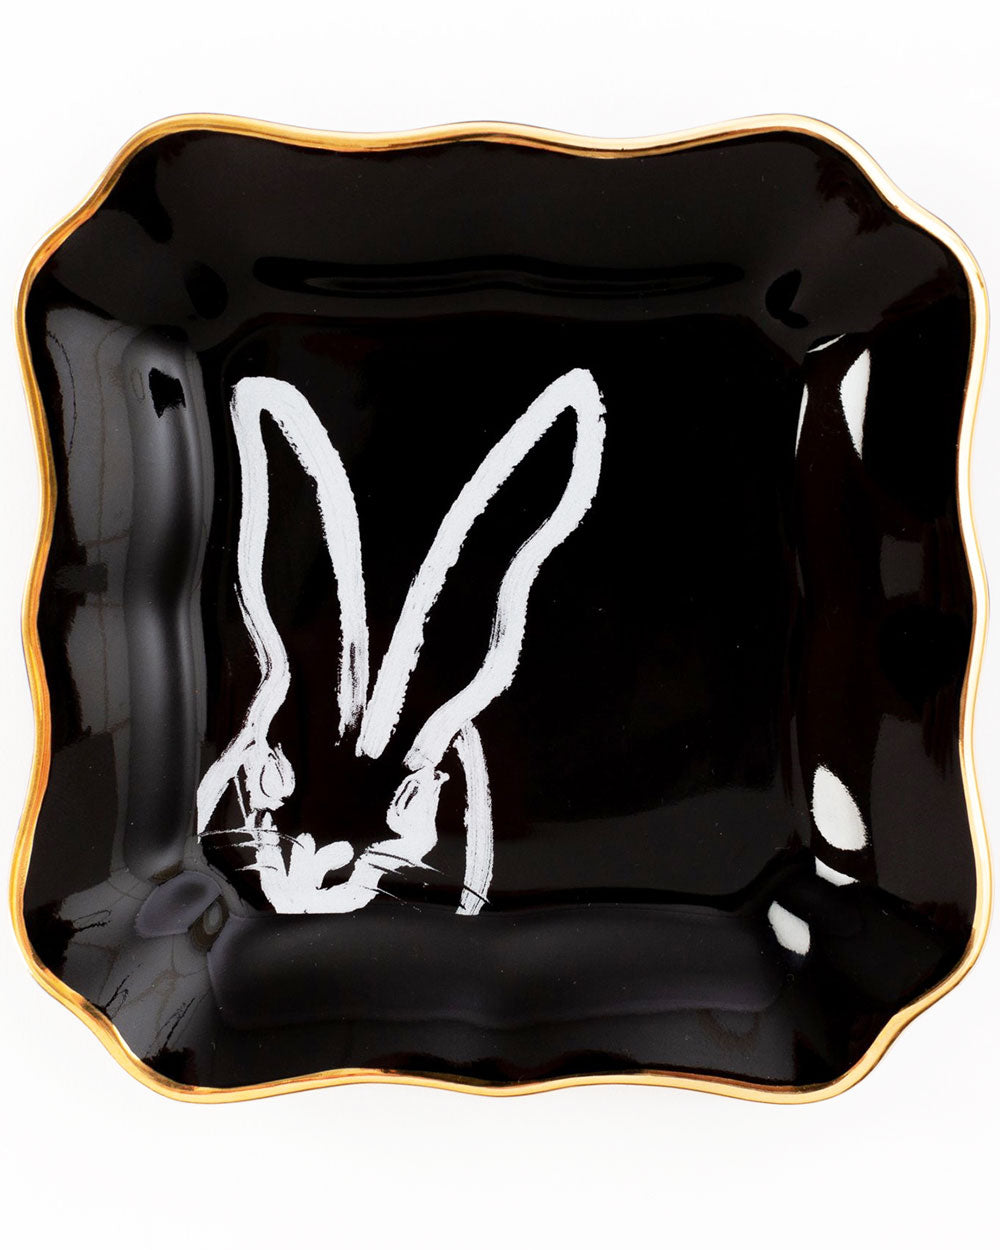 Black and Gold Bunny Portrait Plate